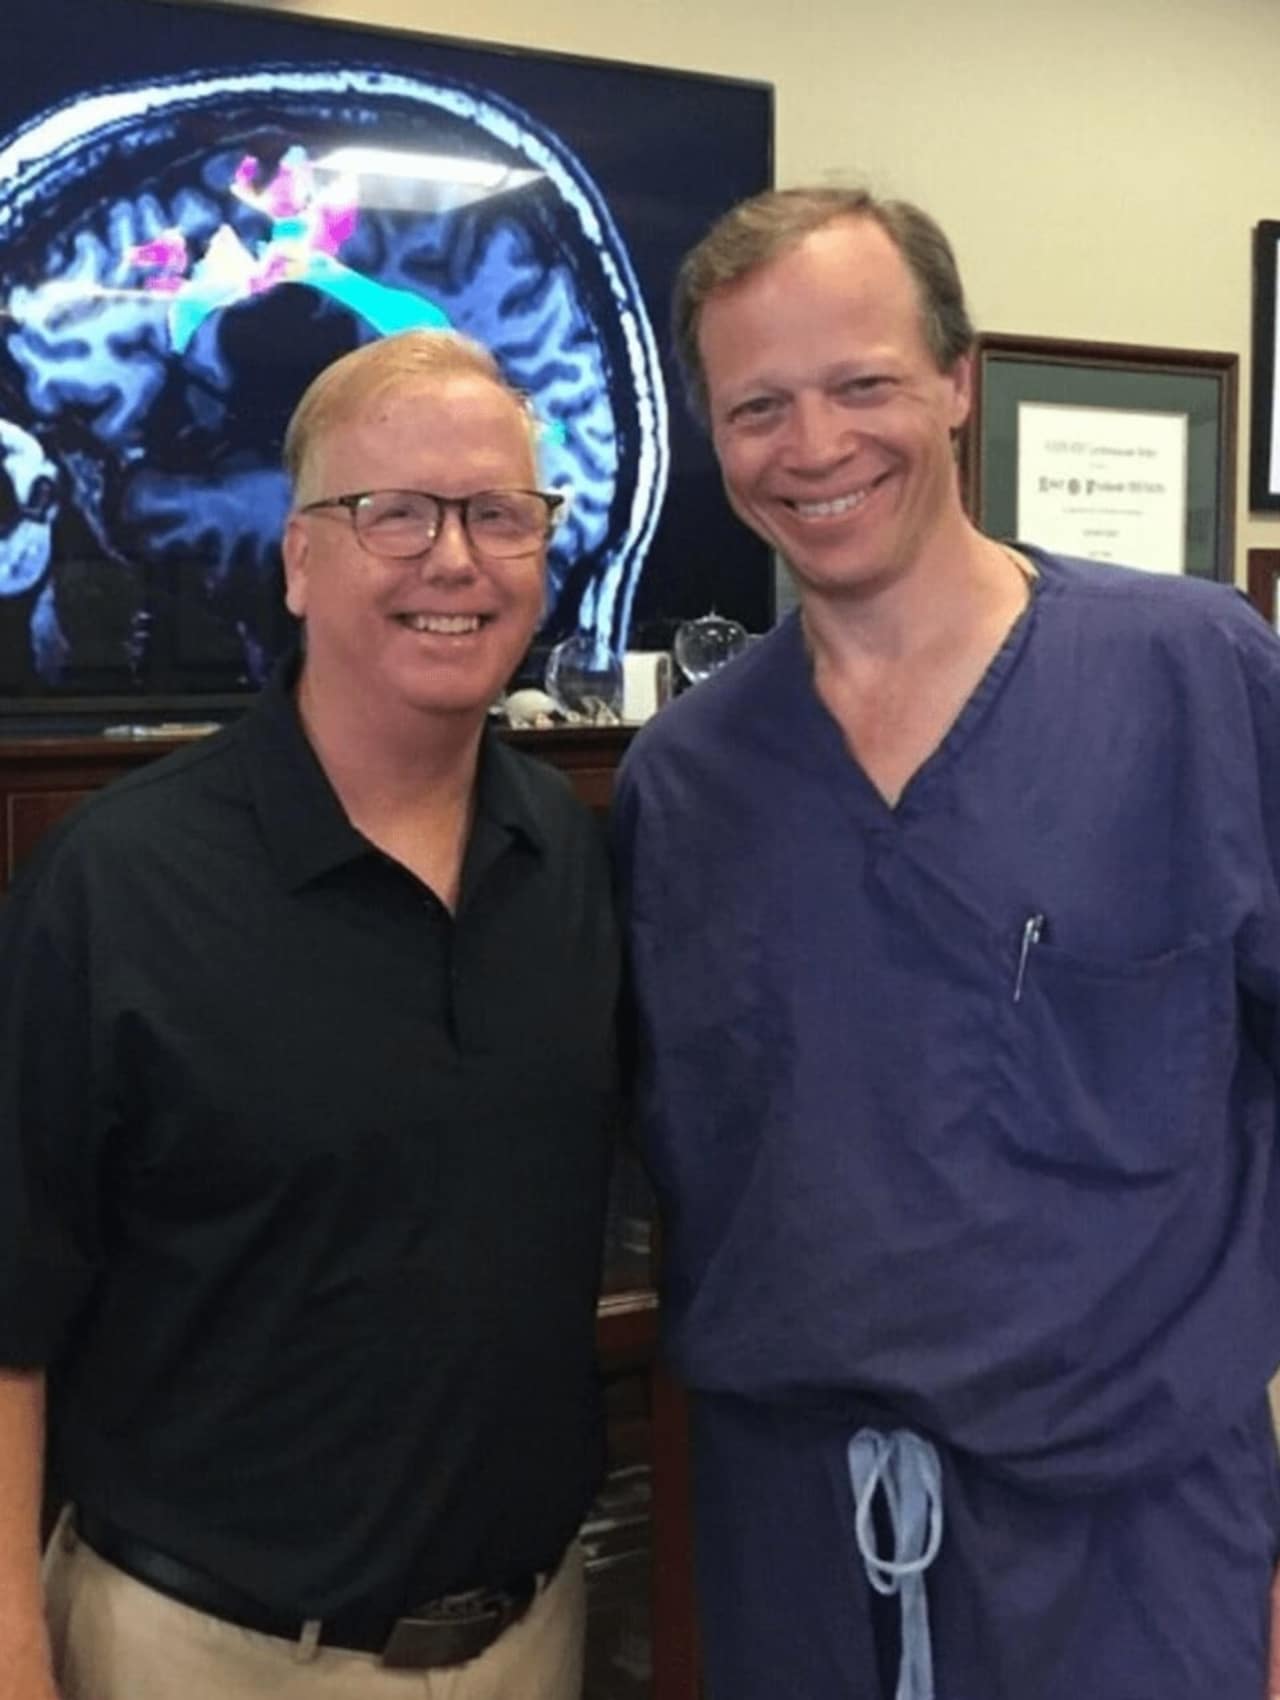 Danbury Mayor Mark Boughton with the man who performed his brain surgery, Dr. Robert Friedlander at the the University of Pittsburgh Medical Center.